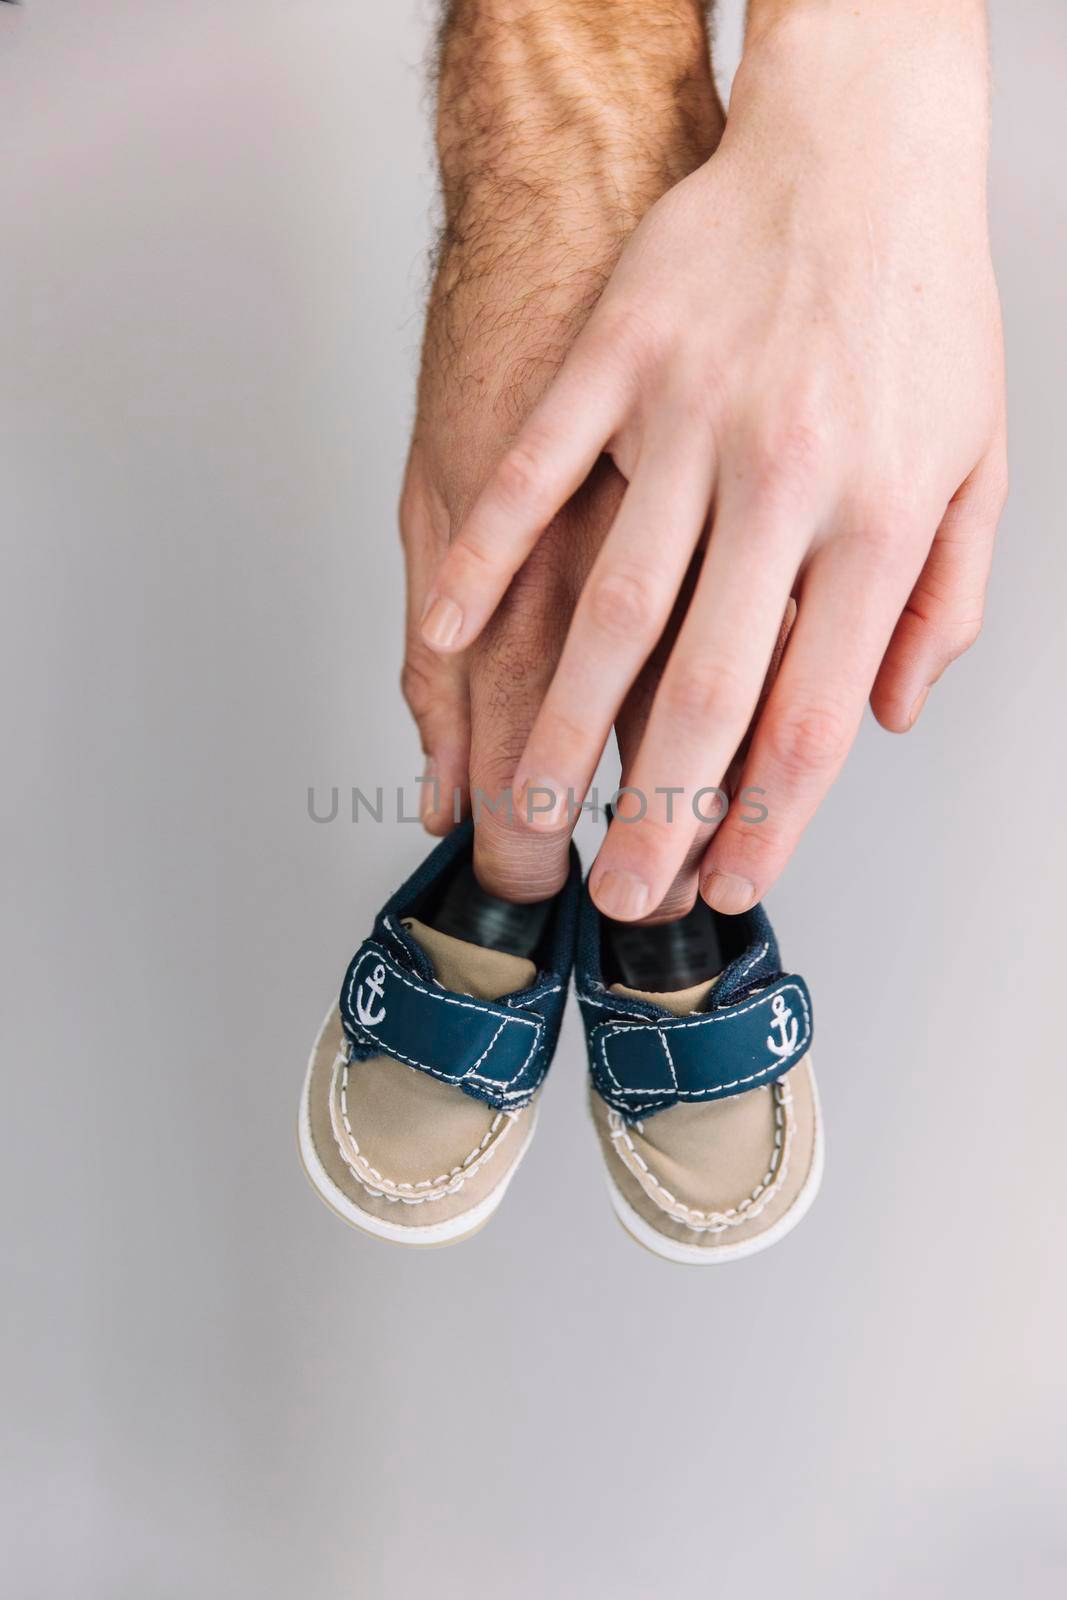 hand holding baby shoes by Zahard